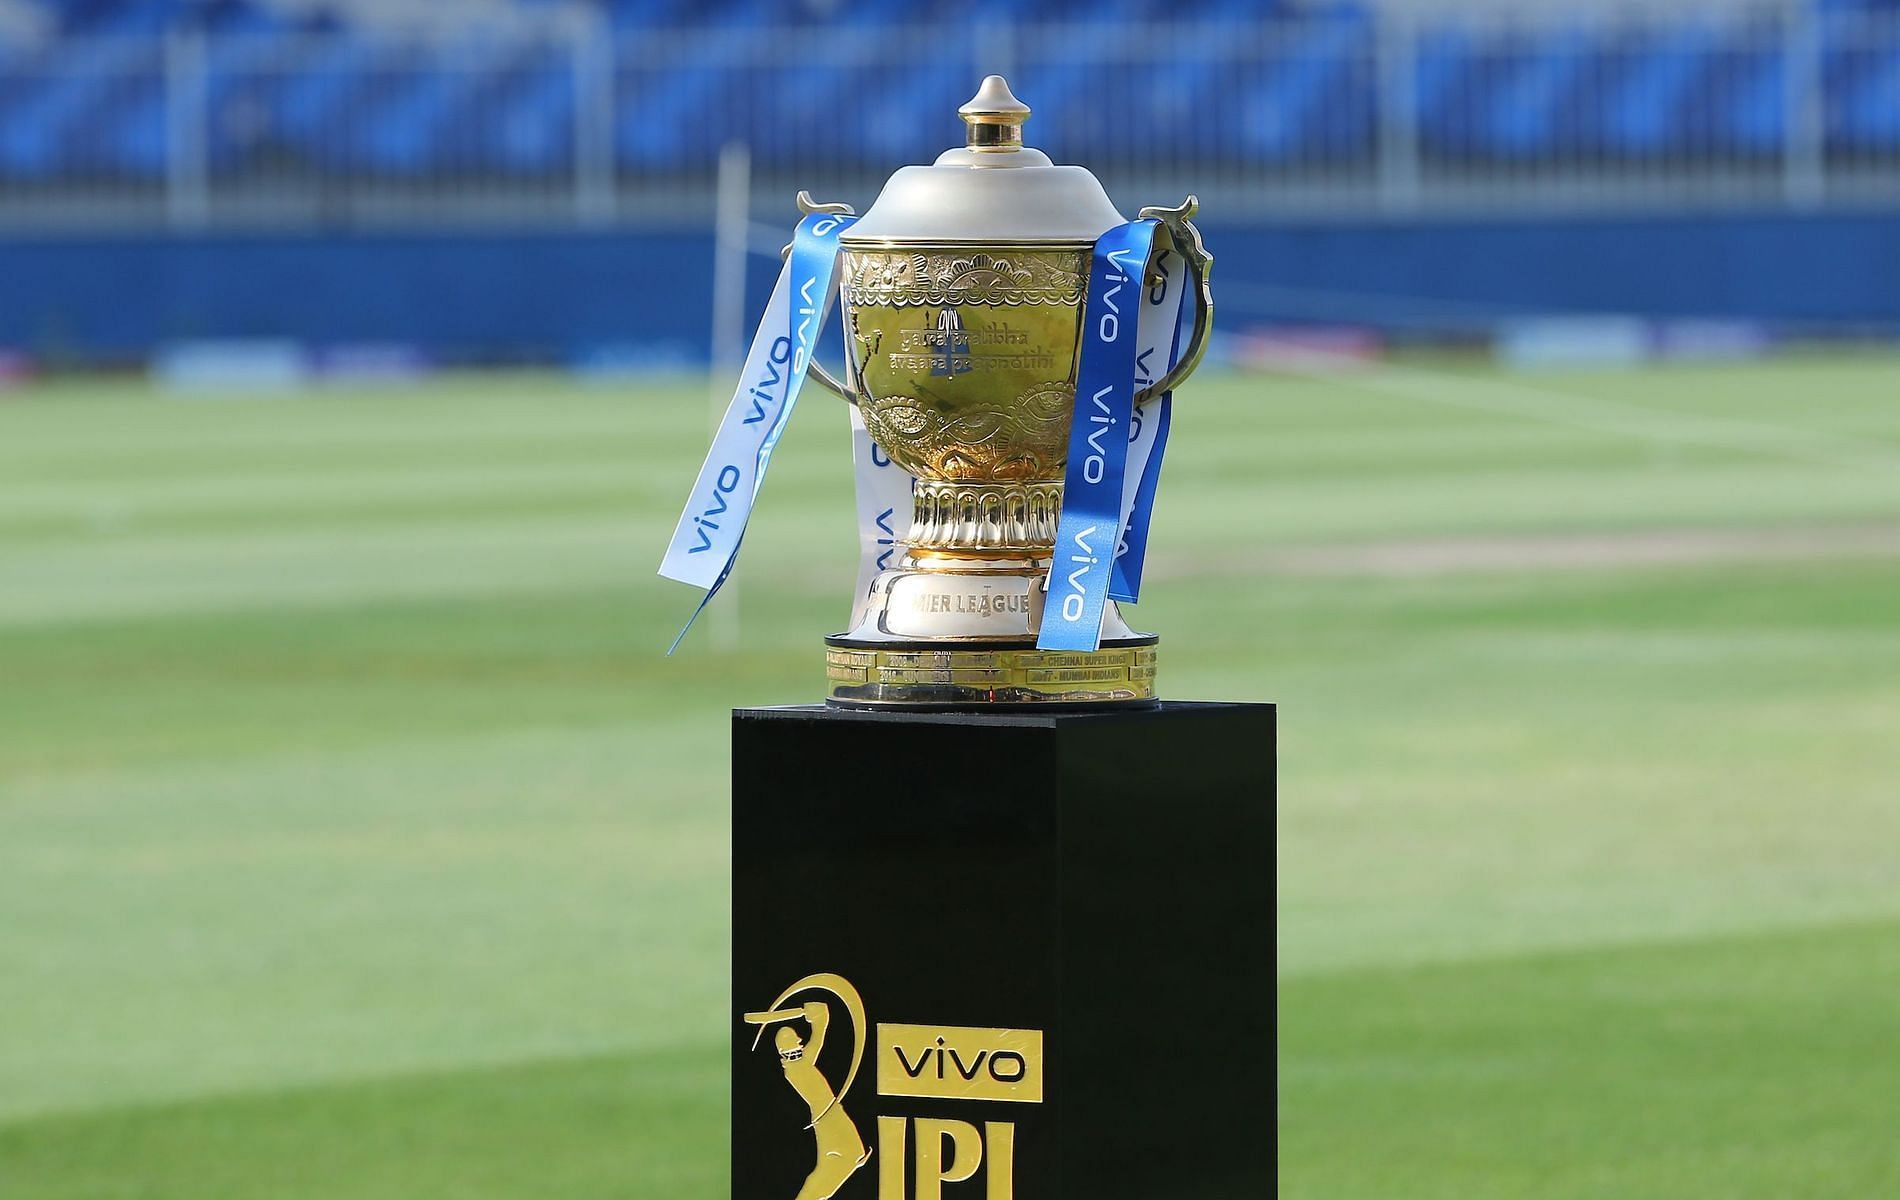 There will be two new franchises in the IPL from the 2022 season.